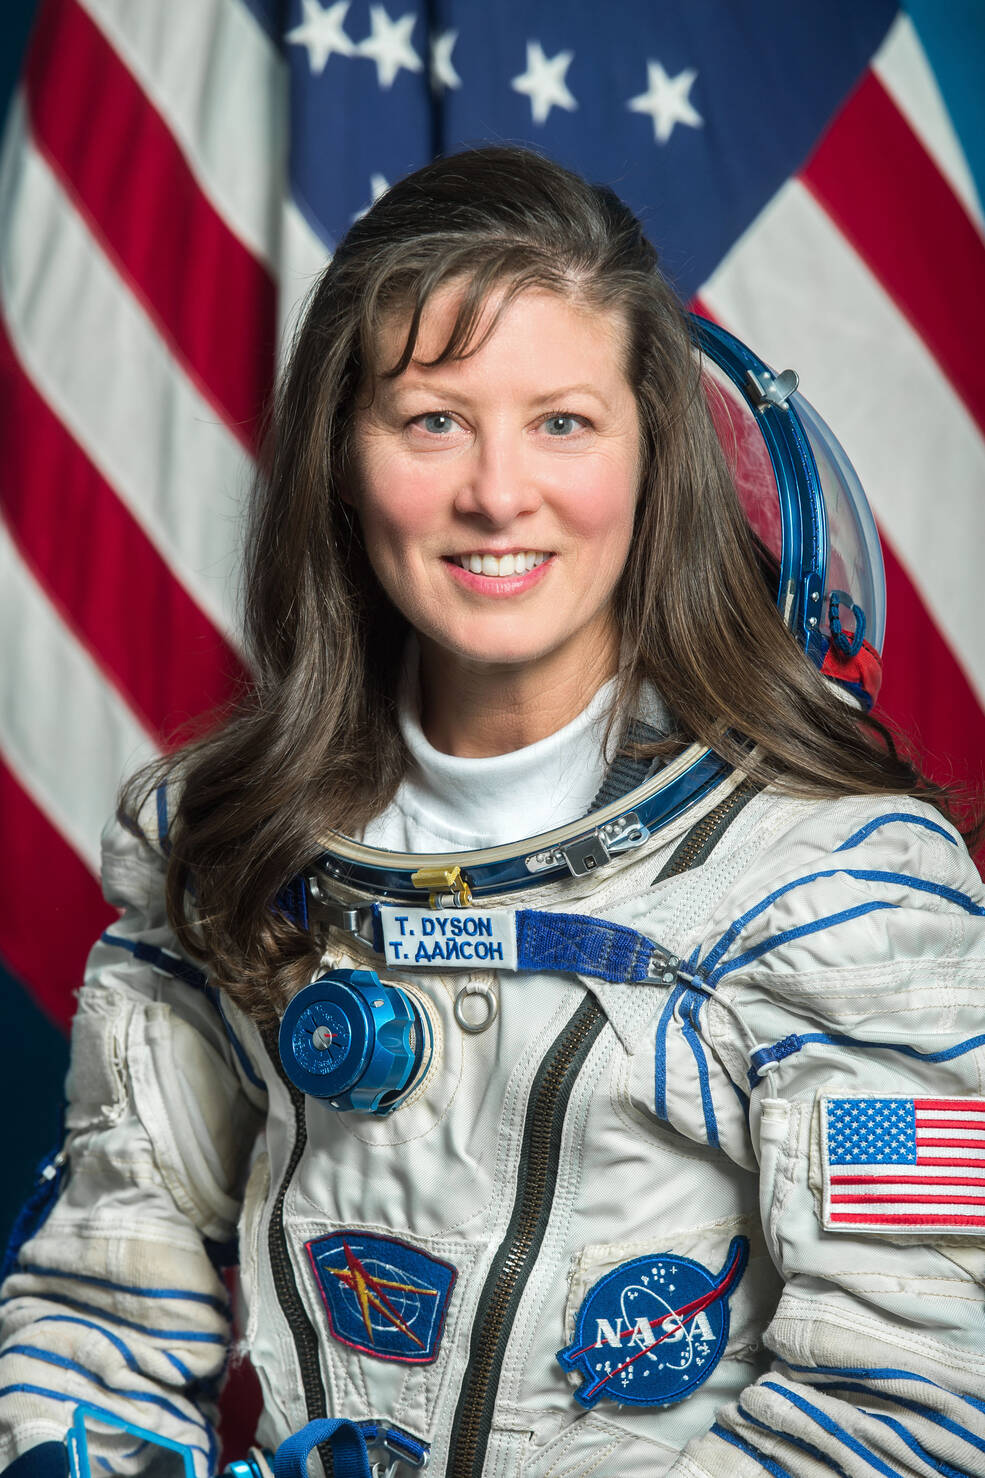 Astronaut Tracy Dyson is wearing her NASA space suit and sitting in front of the American flag 